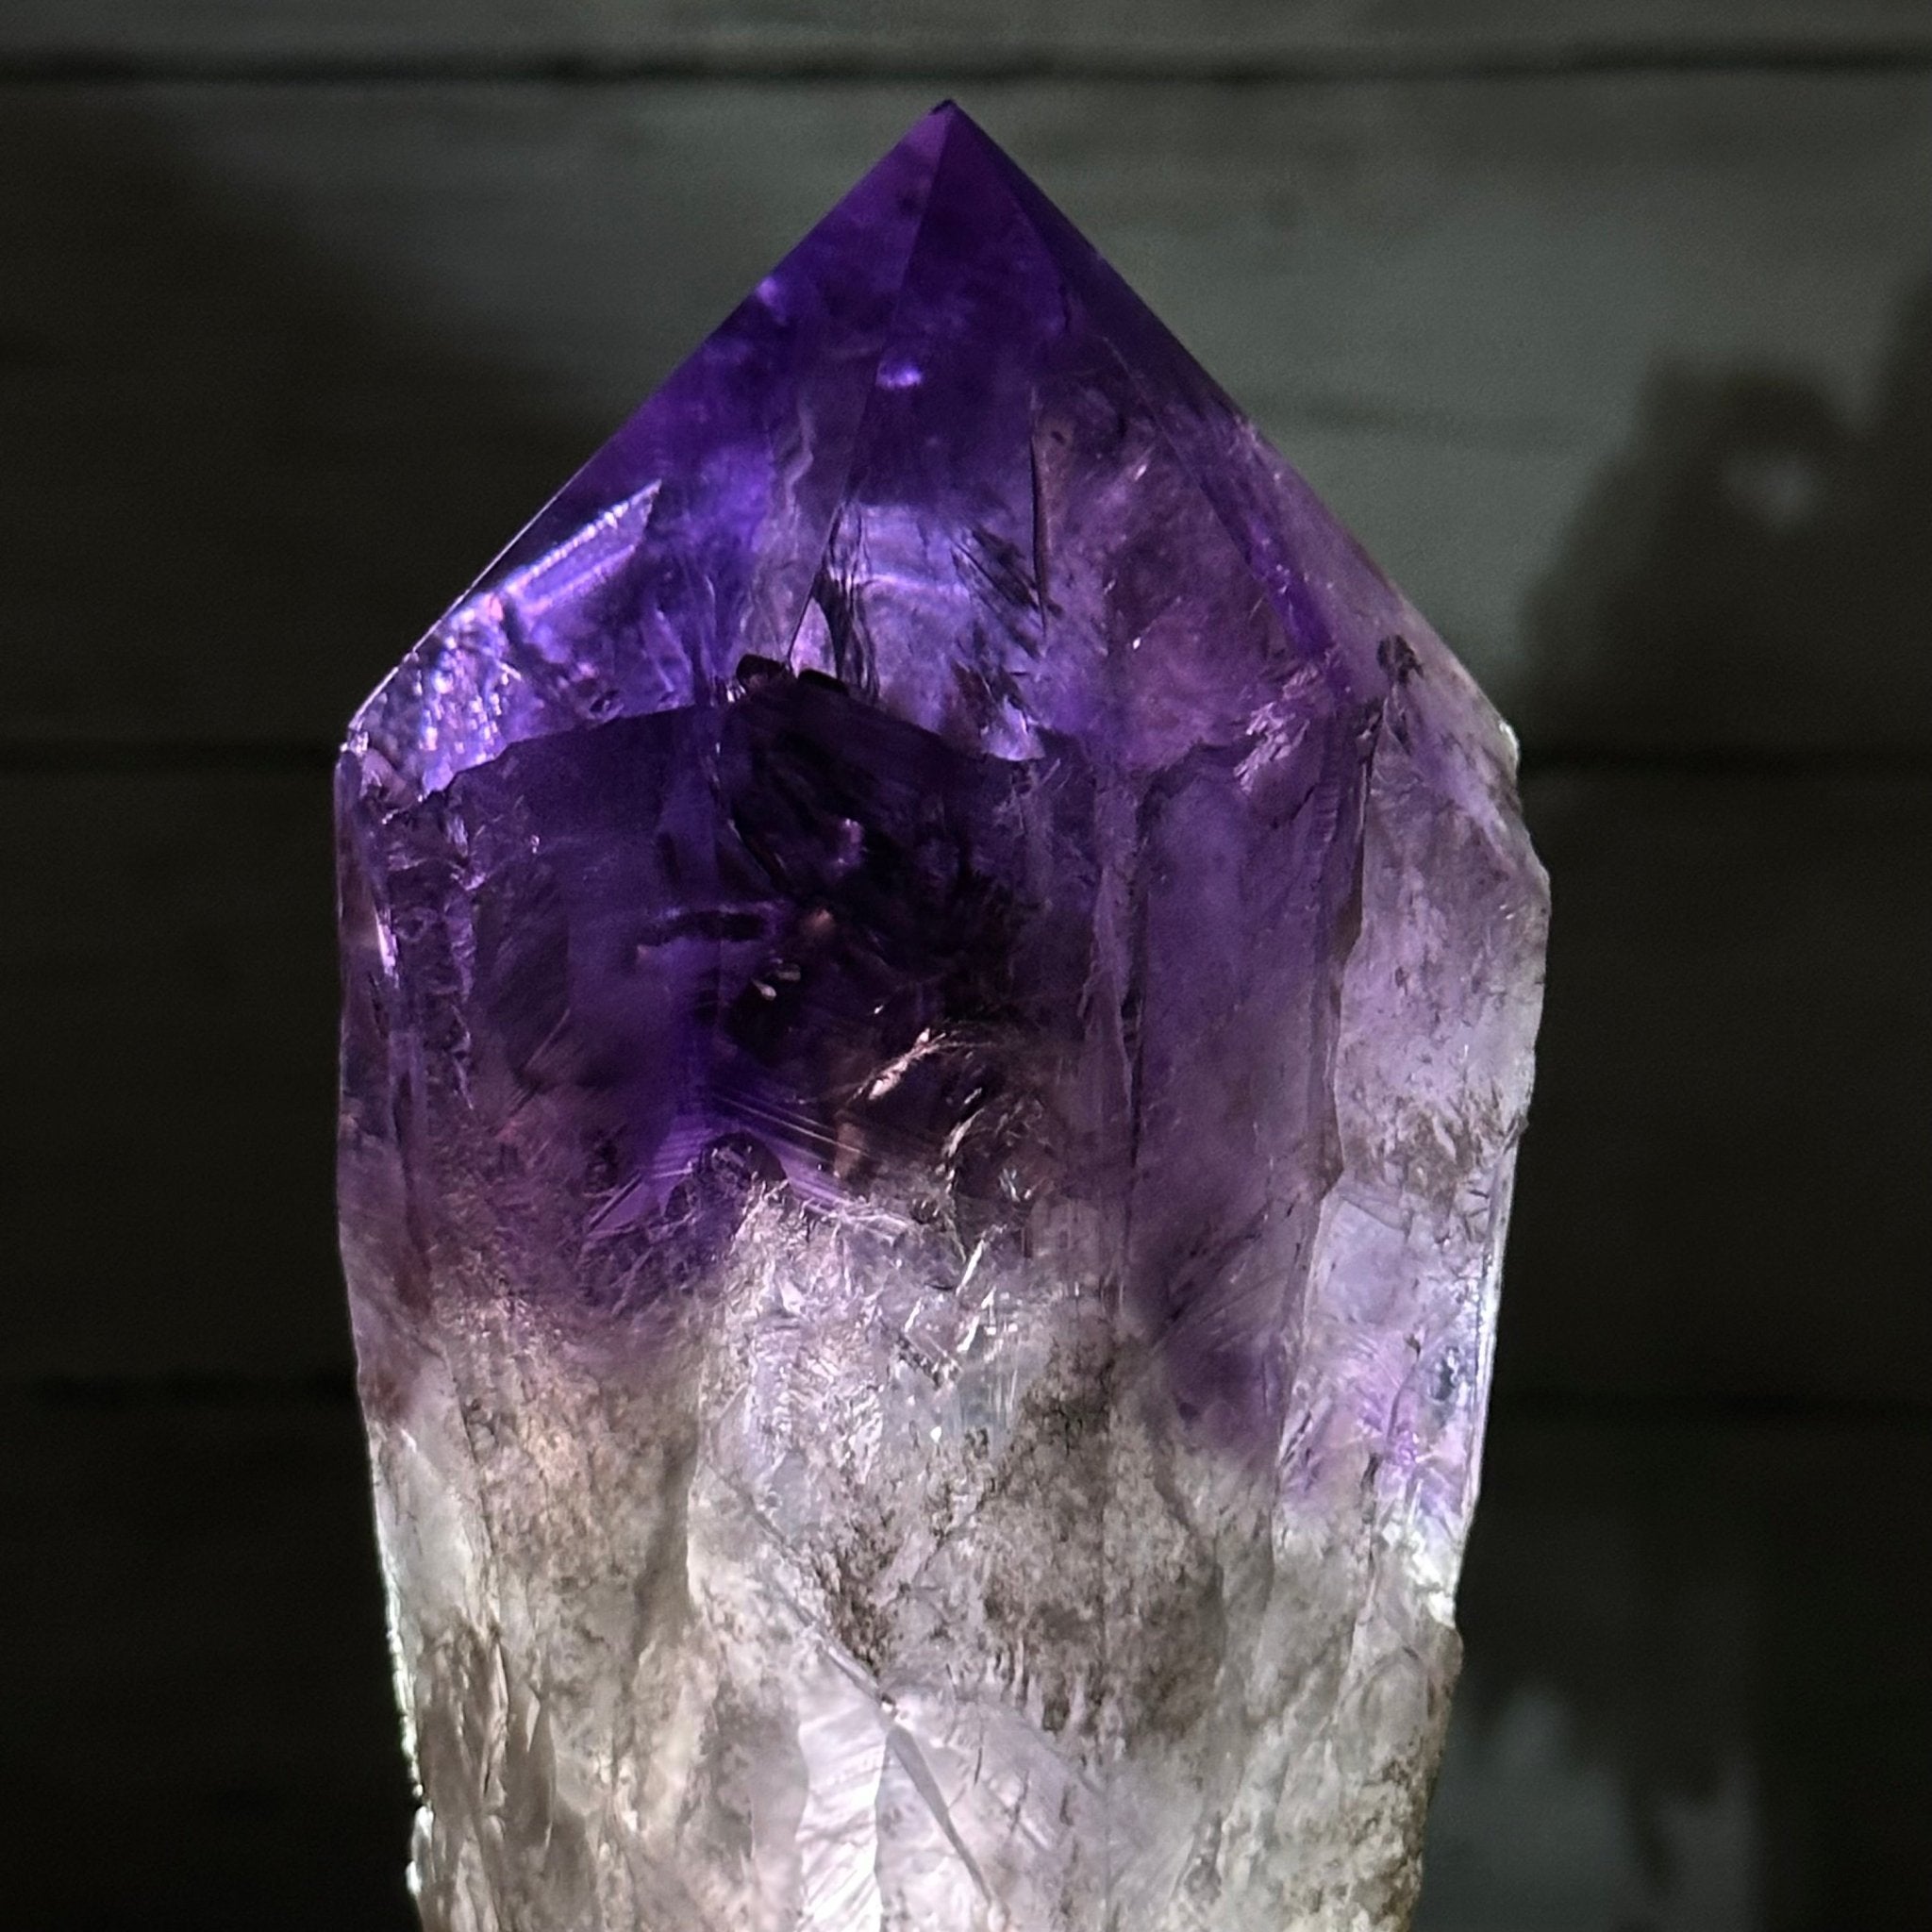 Super Quality Amethyst Wand on a Metal Stand, 2 lbs & 10.7" Tall #3123AM-009 - Brazil GemsBrazil GemsSuper Quality Amethyst Wand on a Metal Stand, 2 lbs & 10.7" Tall #3123AM-009Clusters on Fixed Bases3123AM-009